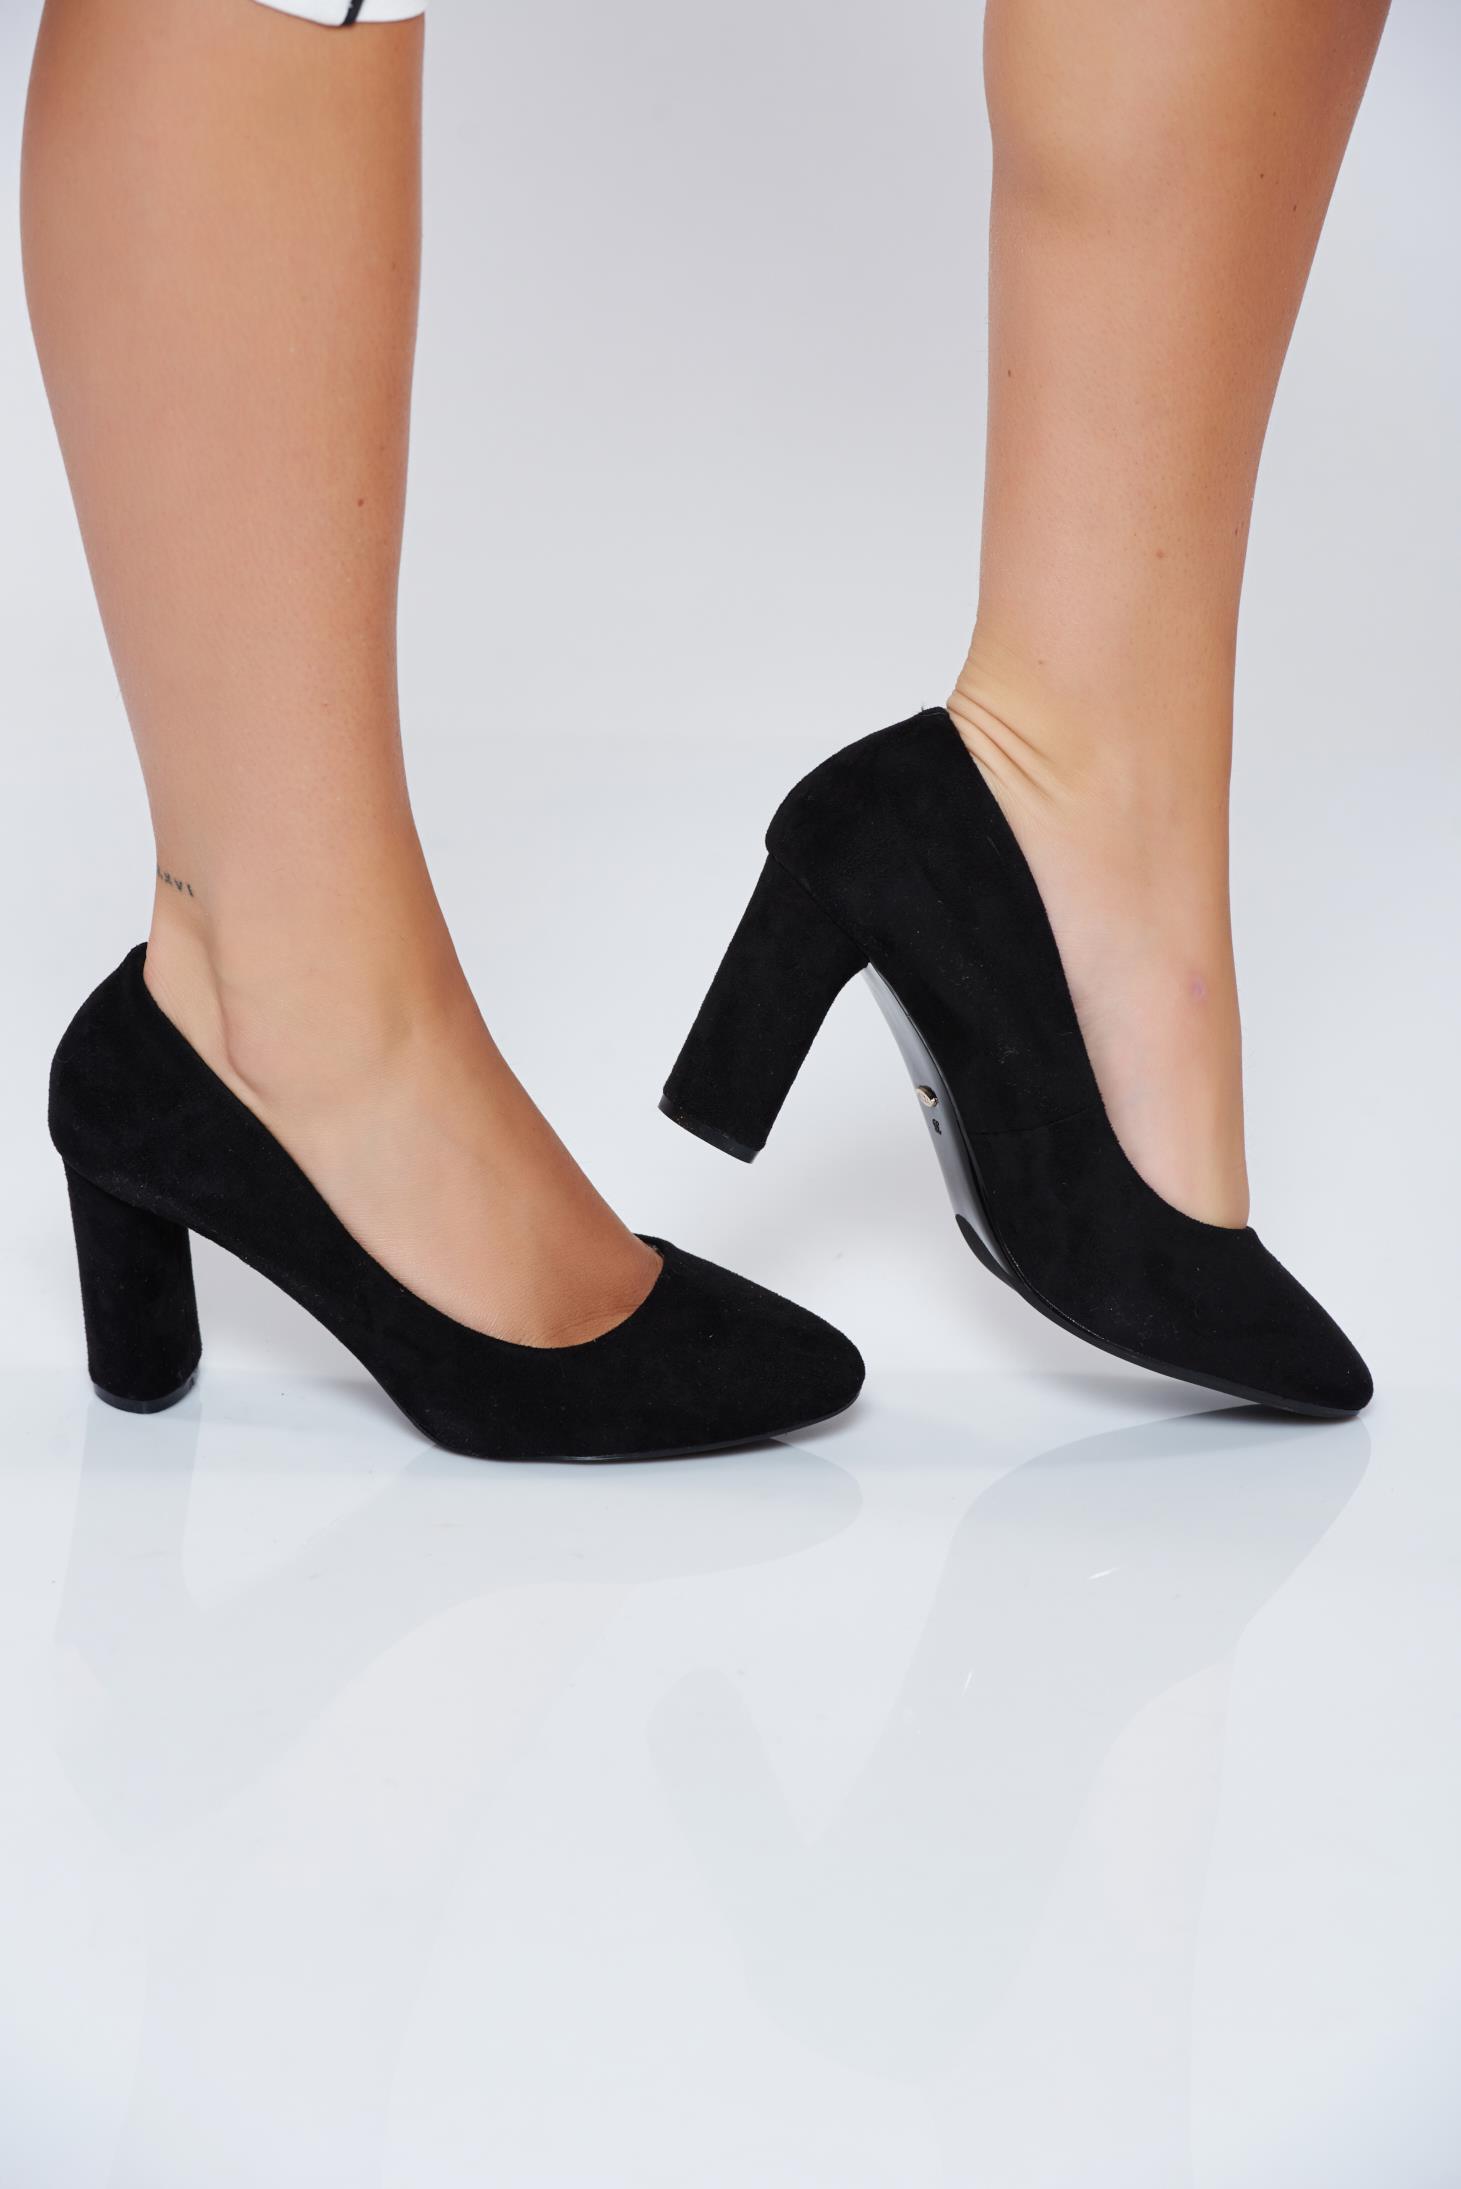 black leather high heel shoes